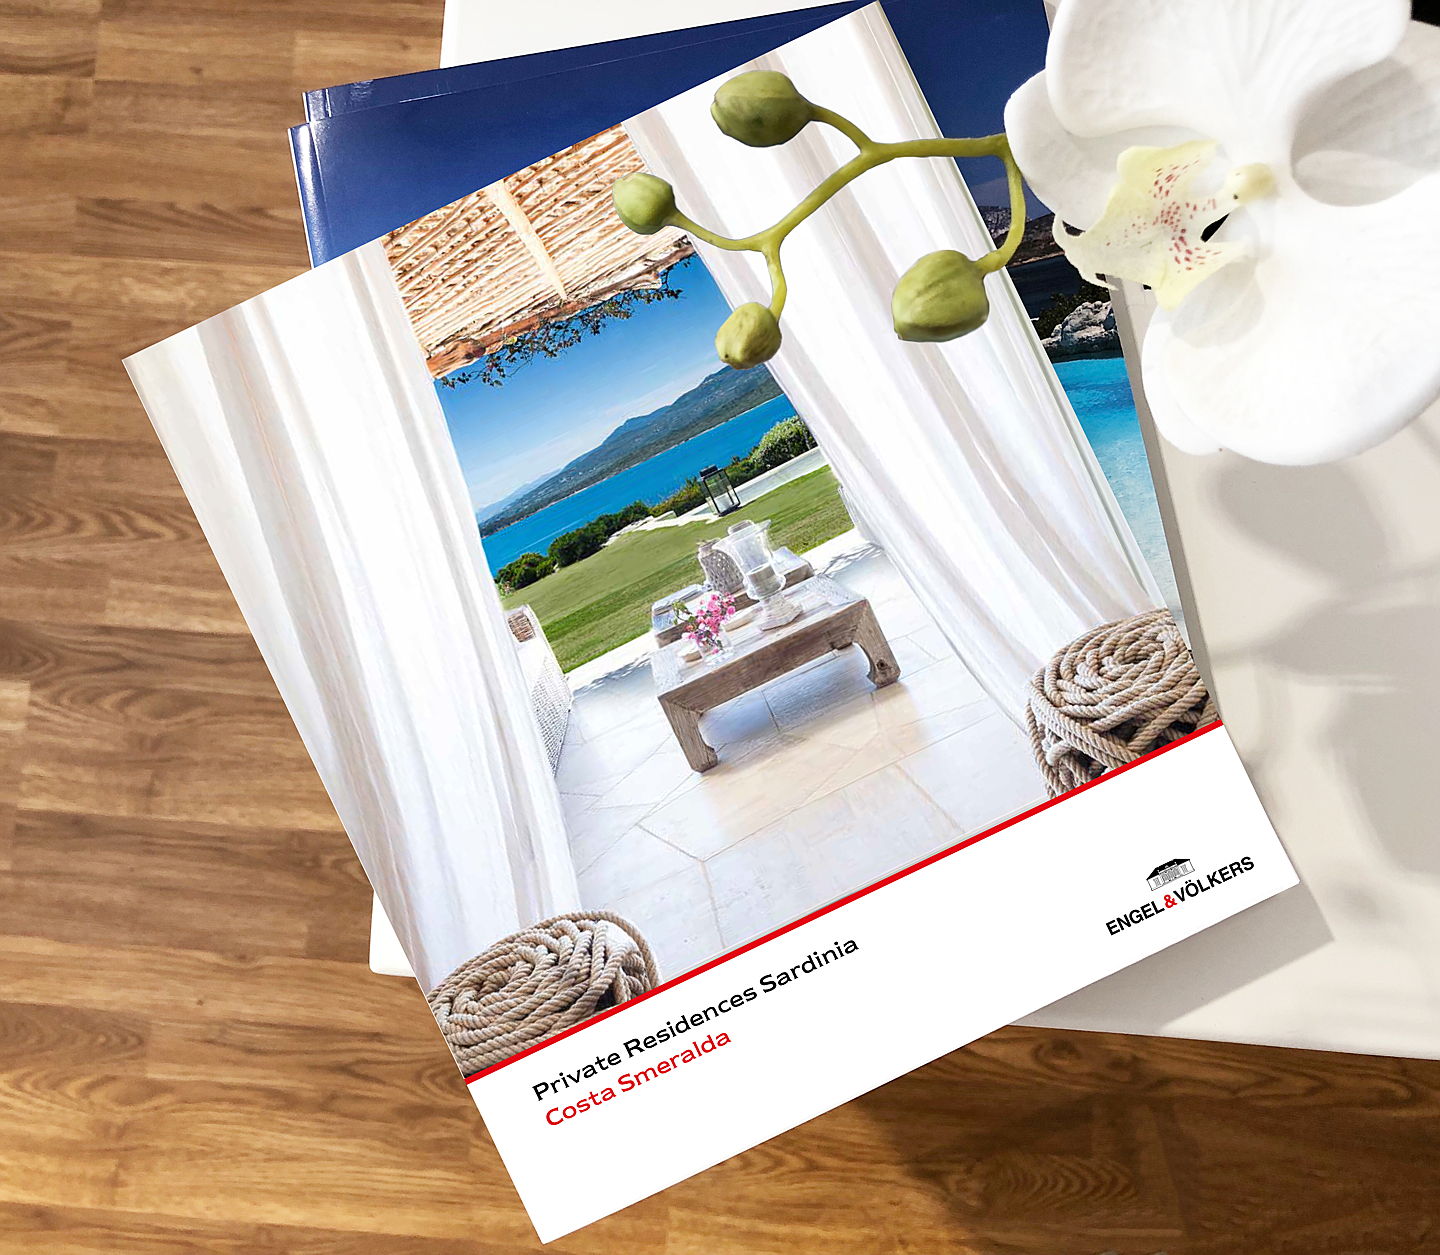  Porto Cervo (SS)
- Discover the new issue of the Private Residences Costa Smeralda: the Engel & Völkers Porto Cervo brochure dedicated to the most exclusive villas and apartments for sale and rent in Costa Smeralda.